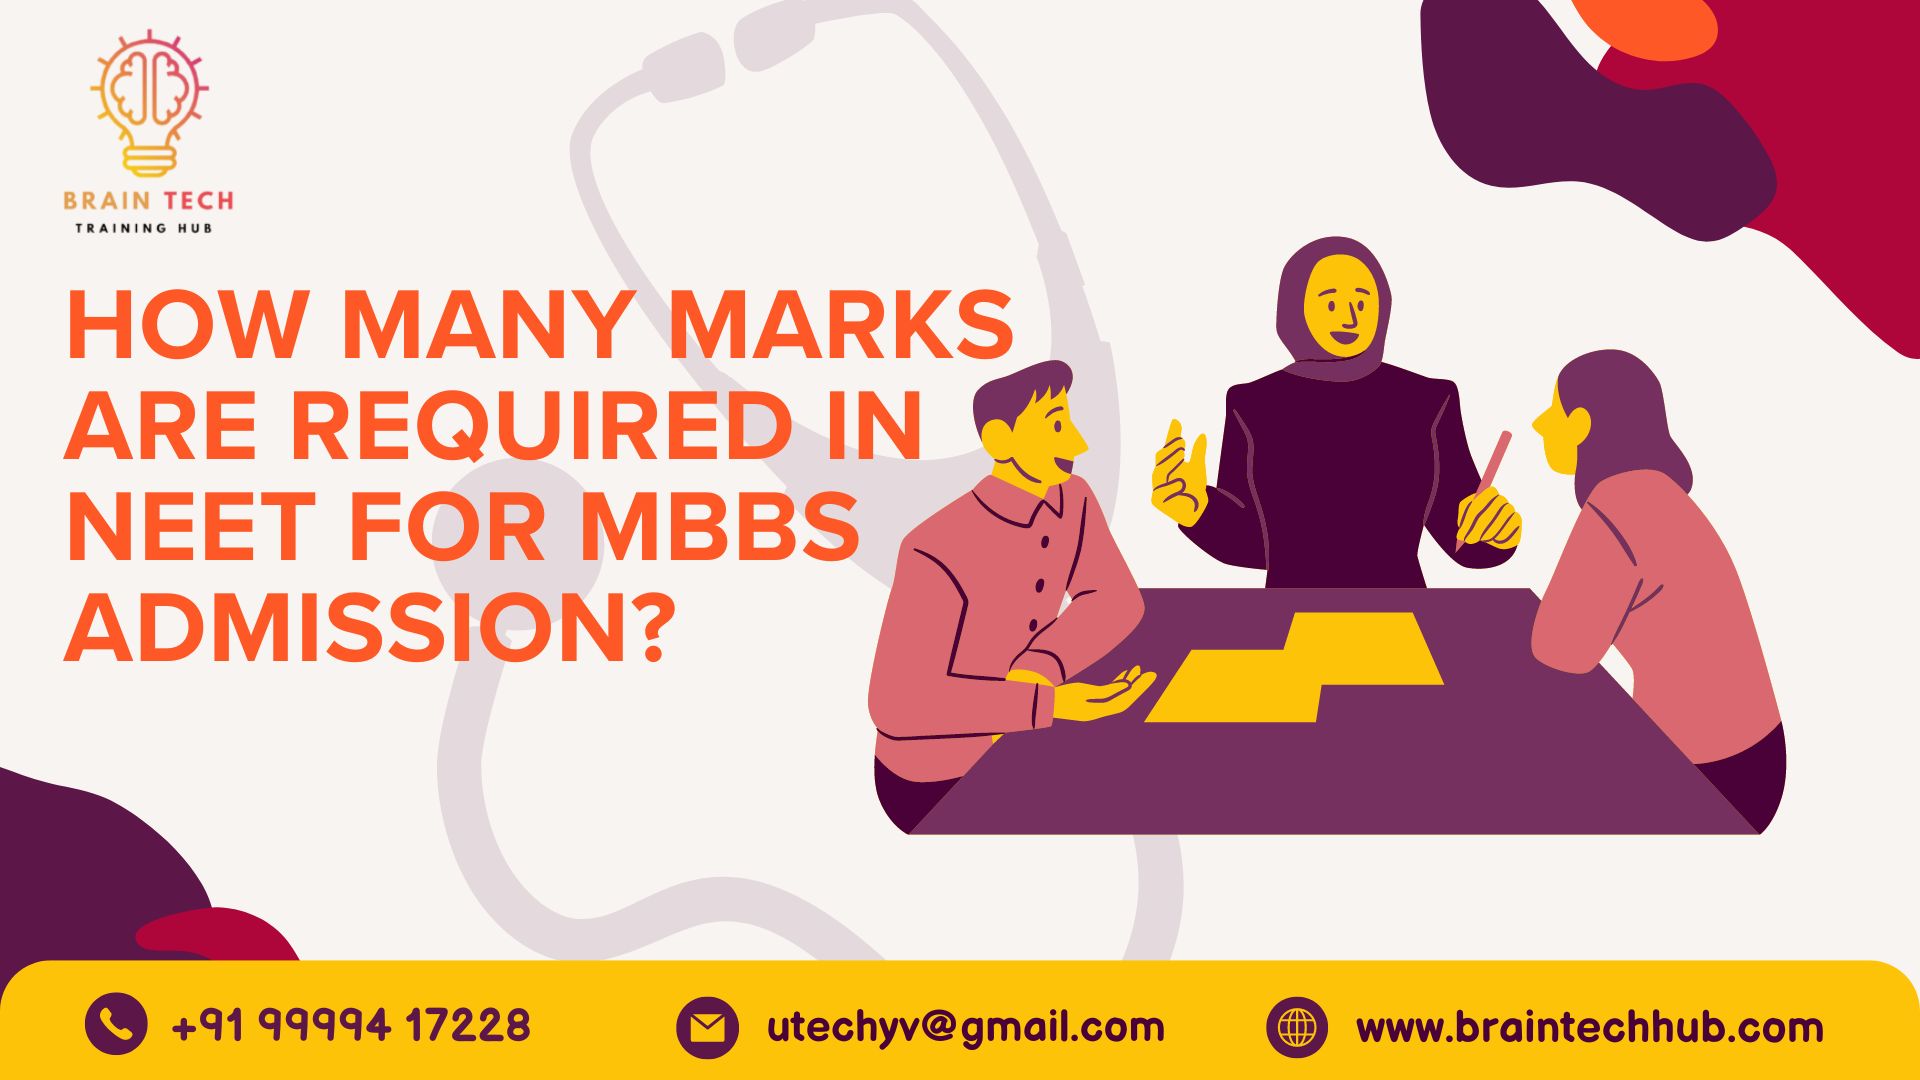 How Many Marks Are Required in NEET for MBBS Admission?